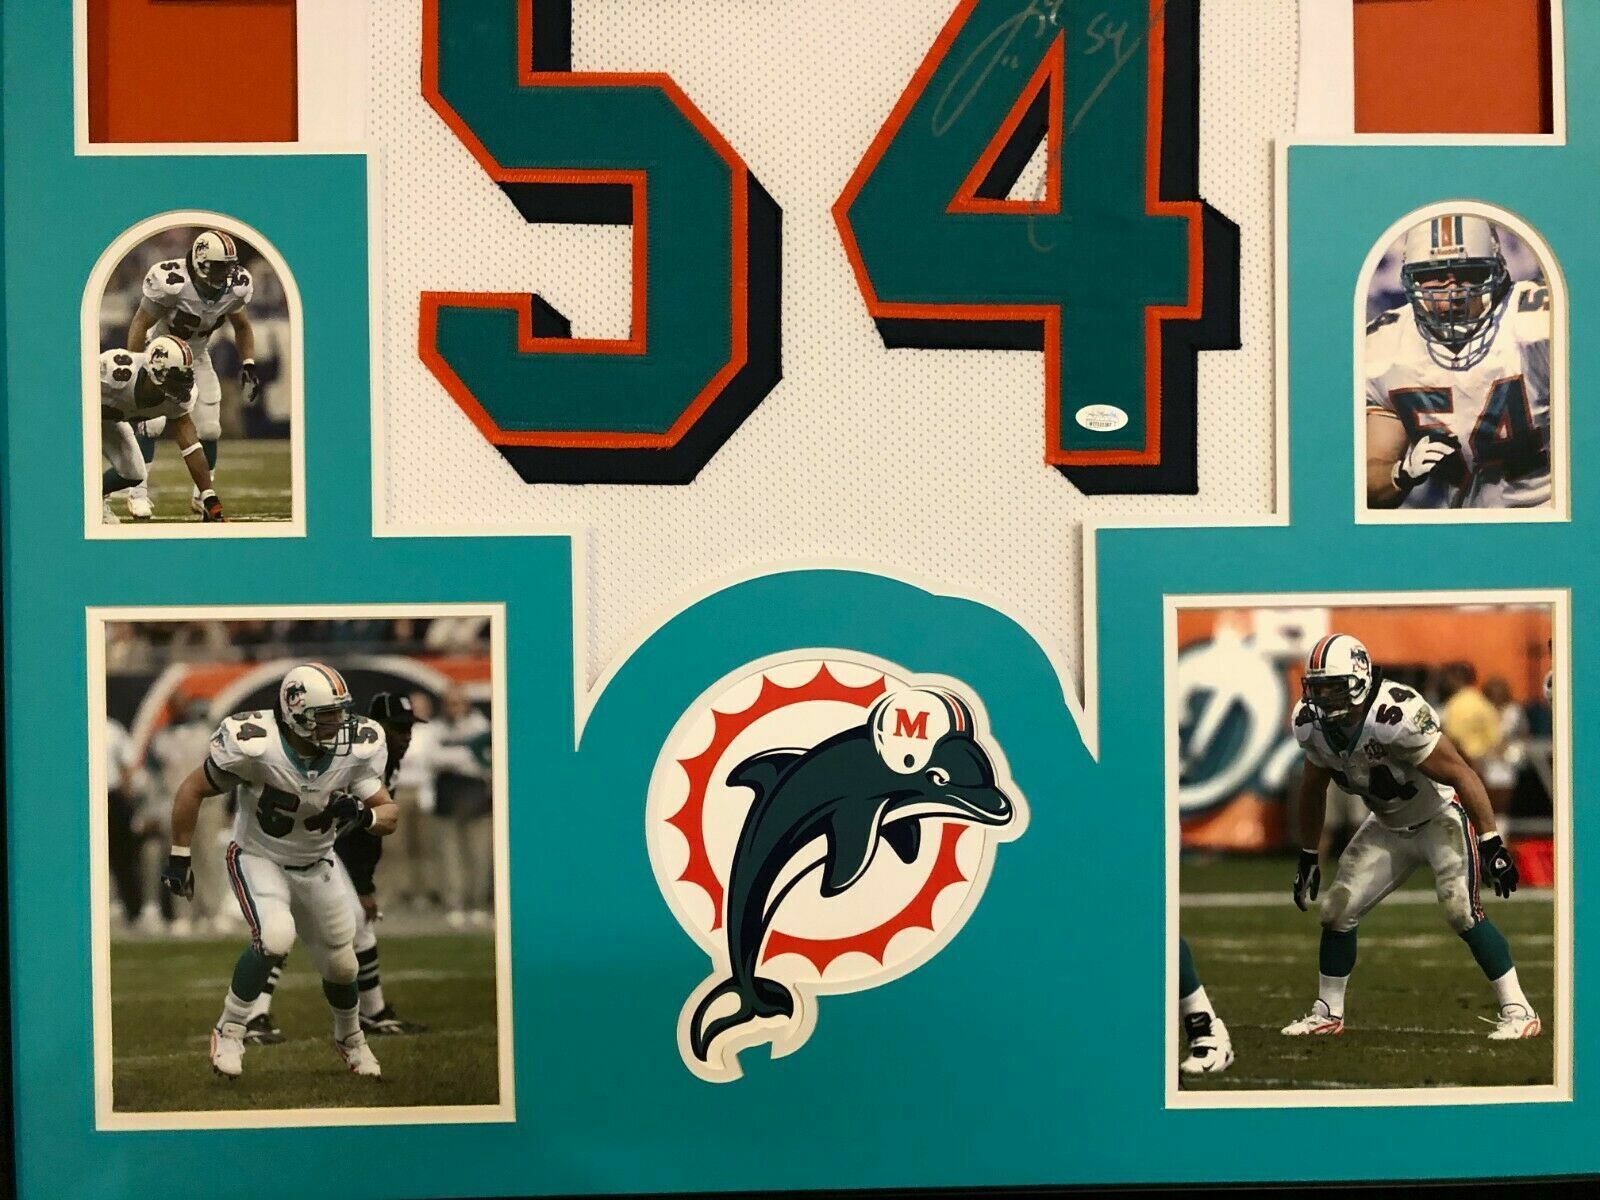 54 dolphins jersey